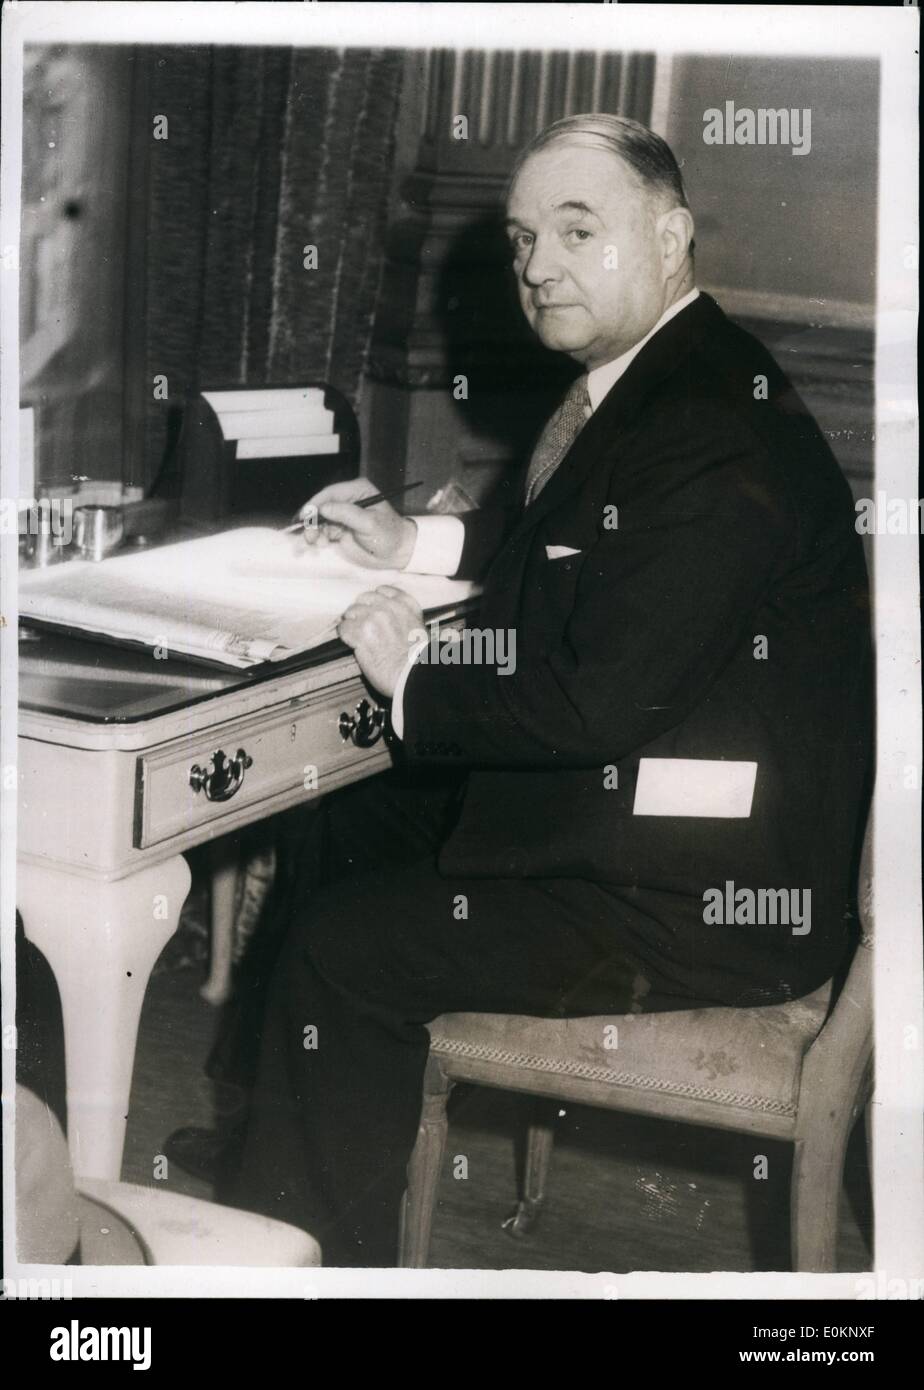 Dec. 12, 1940 - U.S. MYSTERY MAN IN LONDON. COL. DONOVAN AT HOTEL TODAY. KEYSTONE PHOTO SHOWS: Colonel W. J. Donovan, U.S. ''Mystery Man'', thought to be a secret emissary from the White House, who arrived in Britain yesterday by air from Lisbon, photographed at his hotel Stock Photo